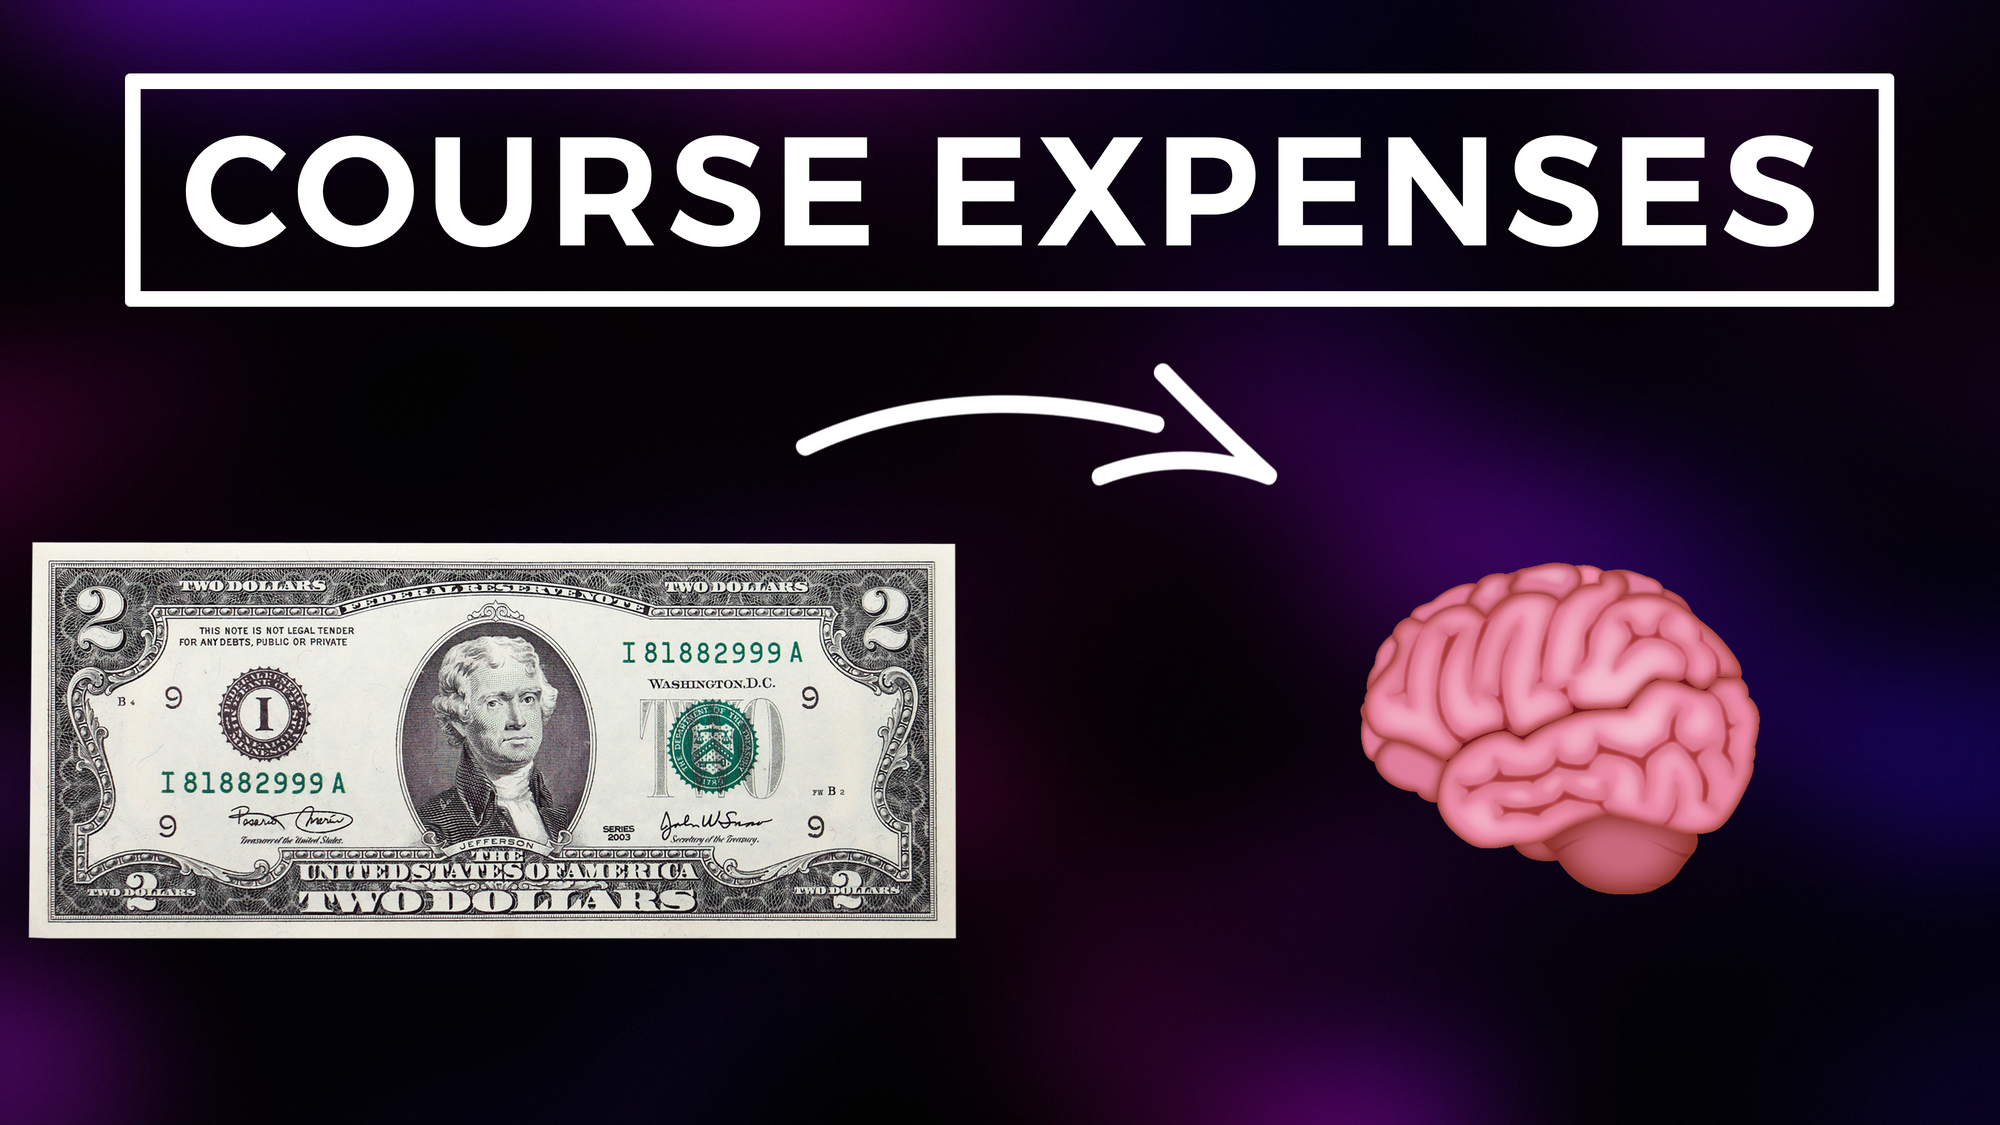 3 Ways To Ask for Course Expenses